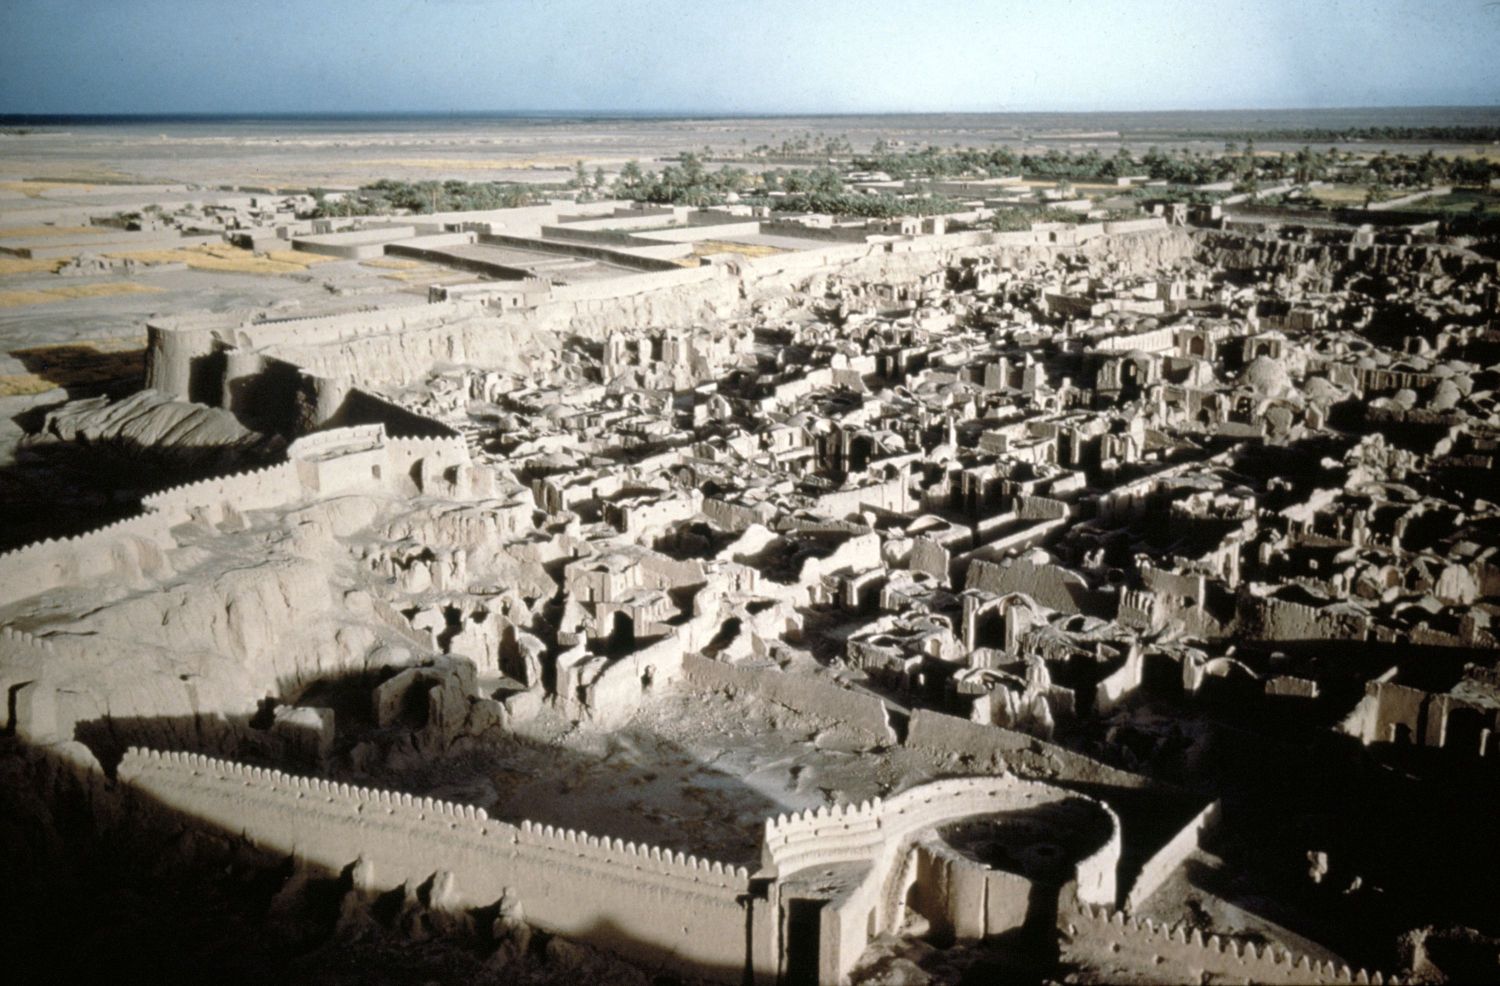 Ruins of the city as viewed from the top of Arg (Citadel).